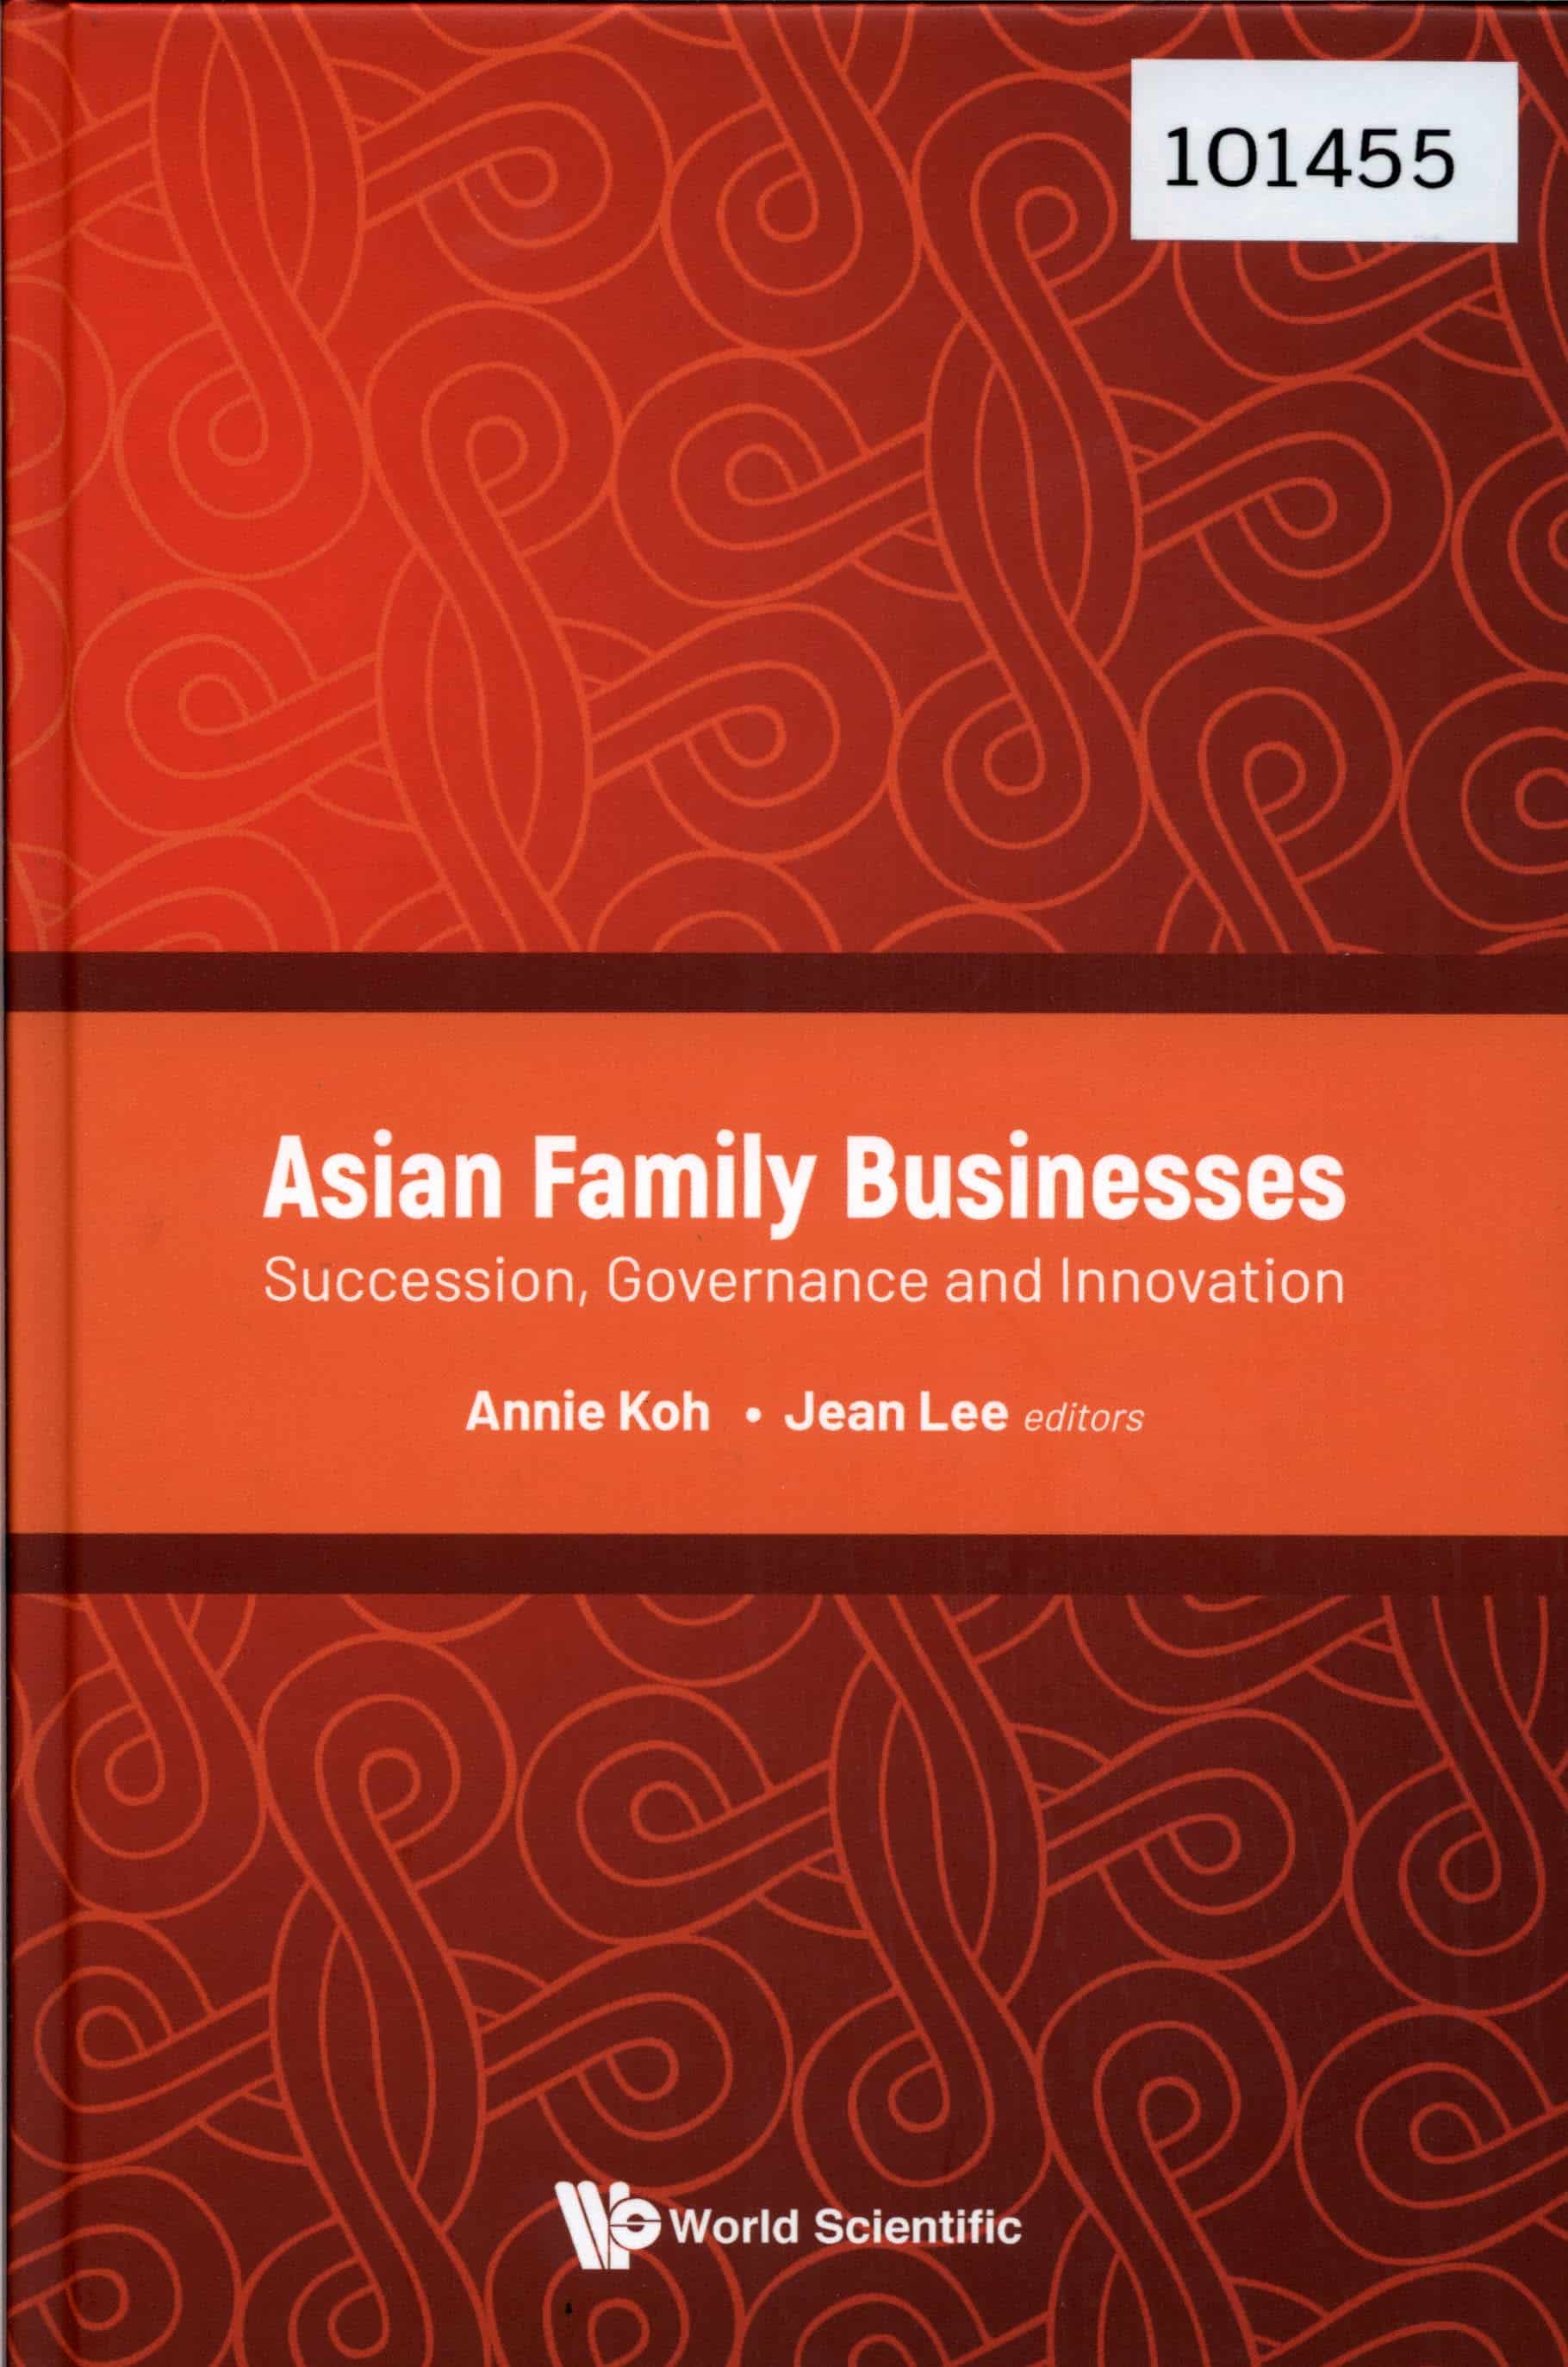 Asian family businesses: succession, governance and innovation 